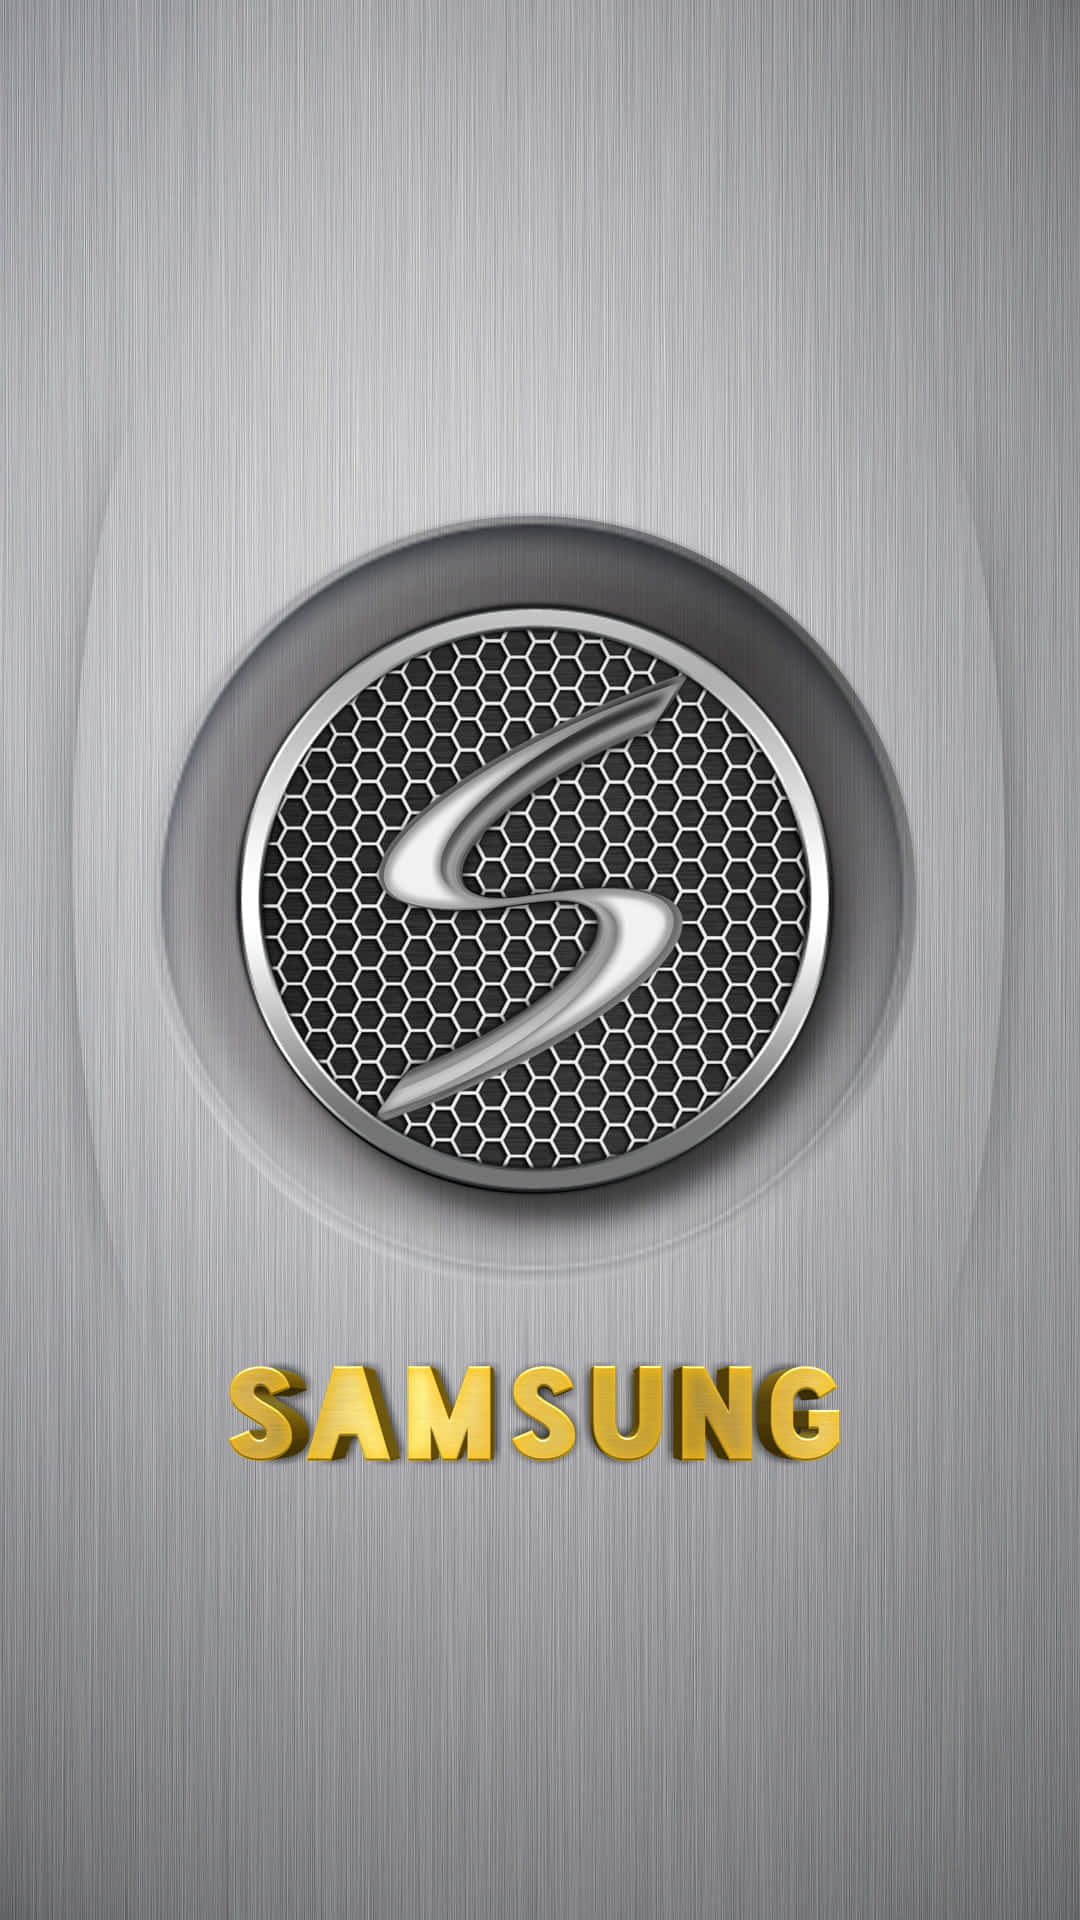 Stay Connected with the Samsung Galaxy S" Wallpaper